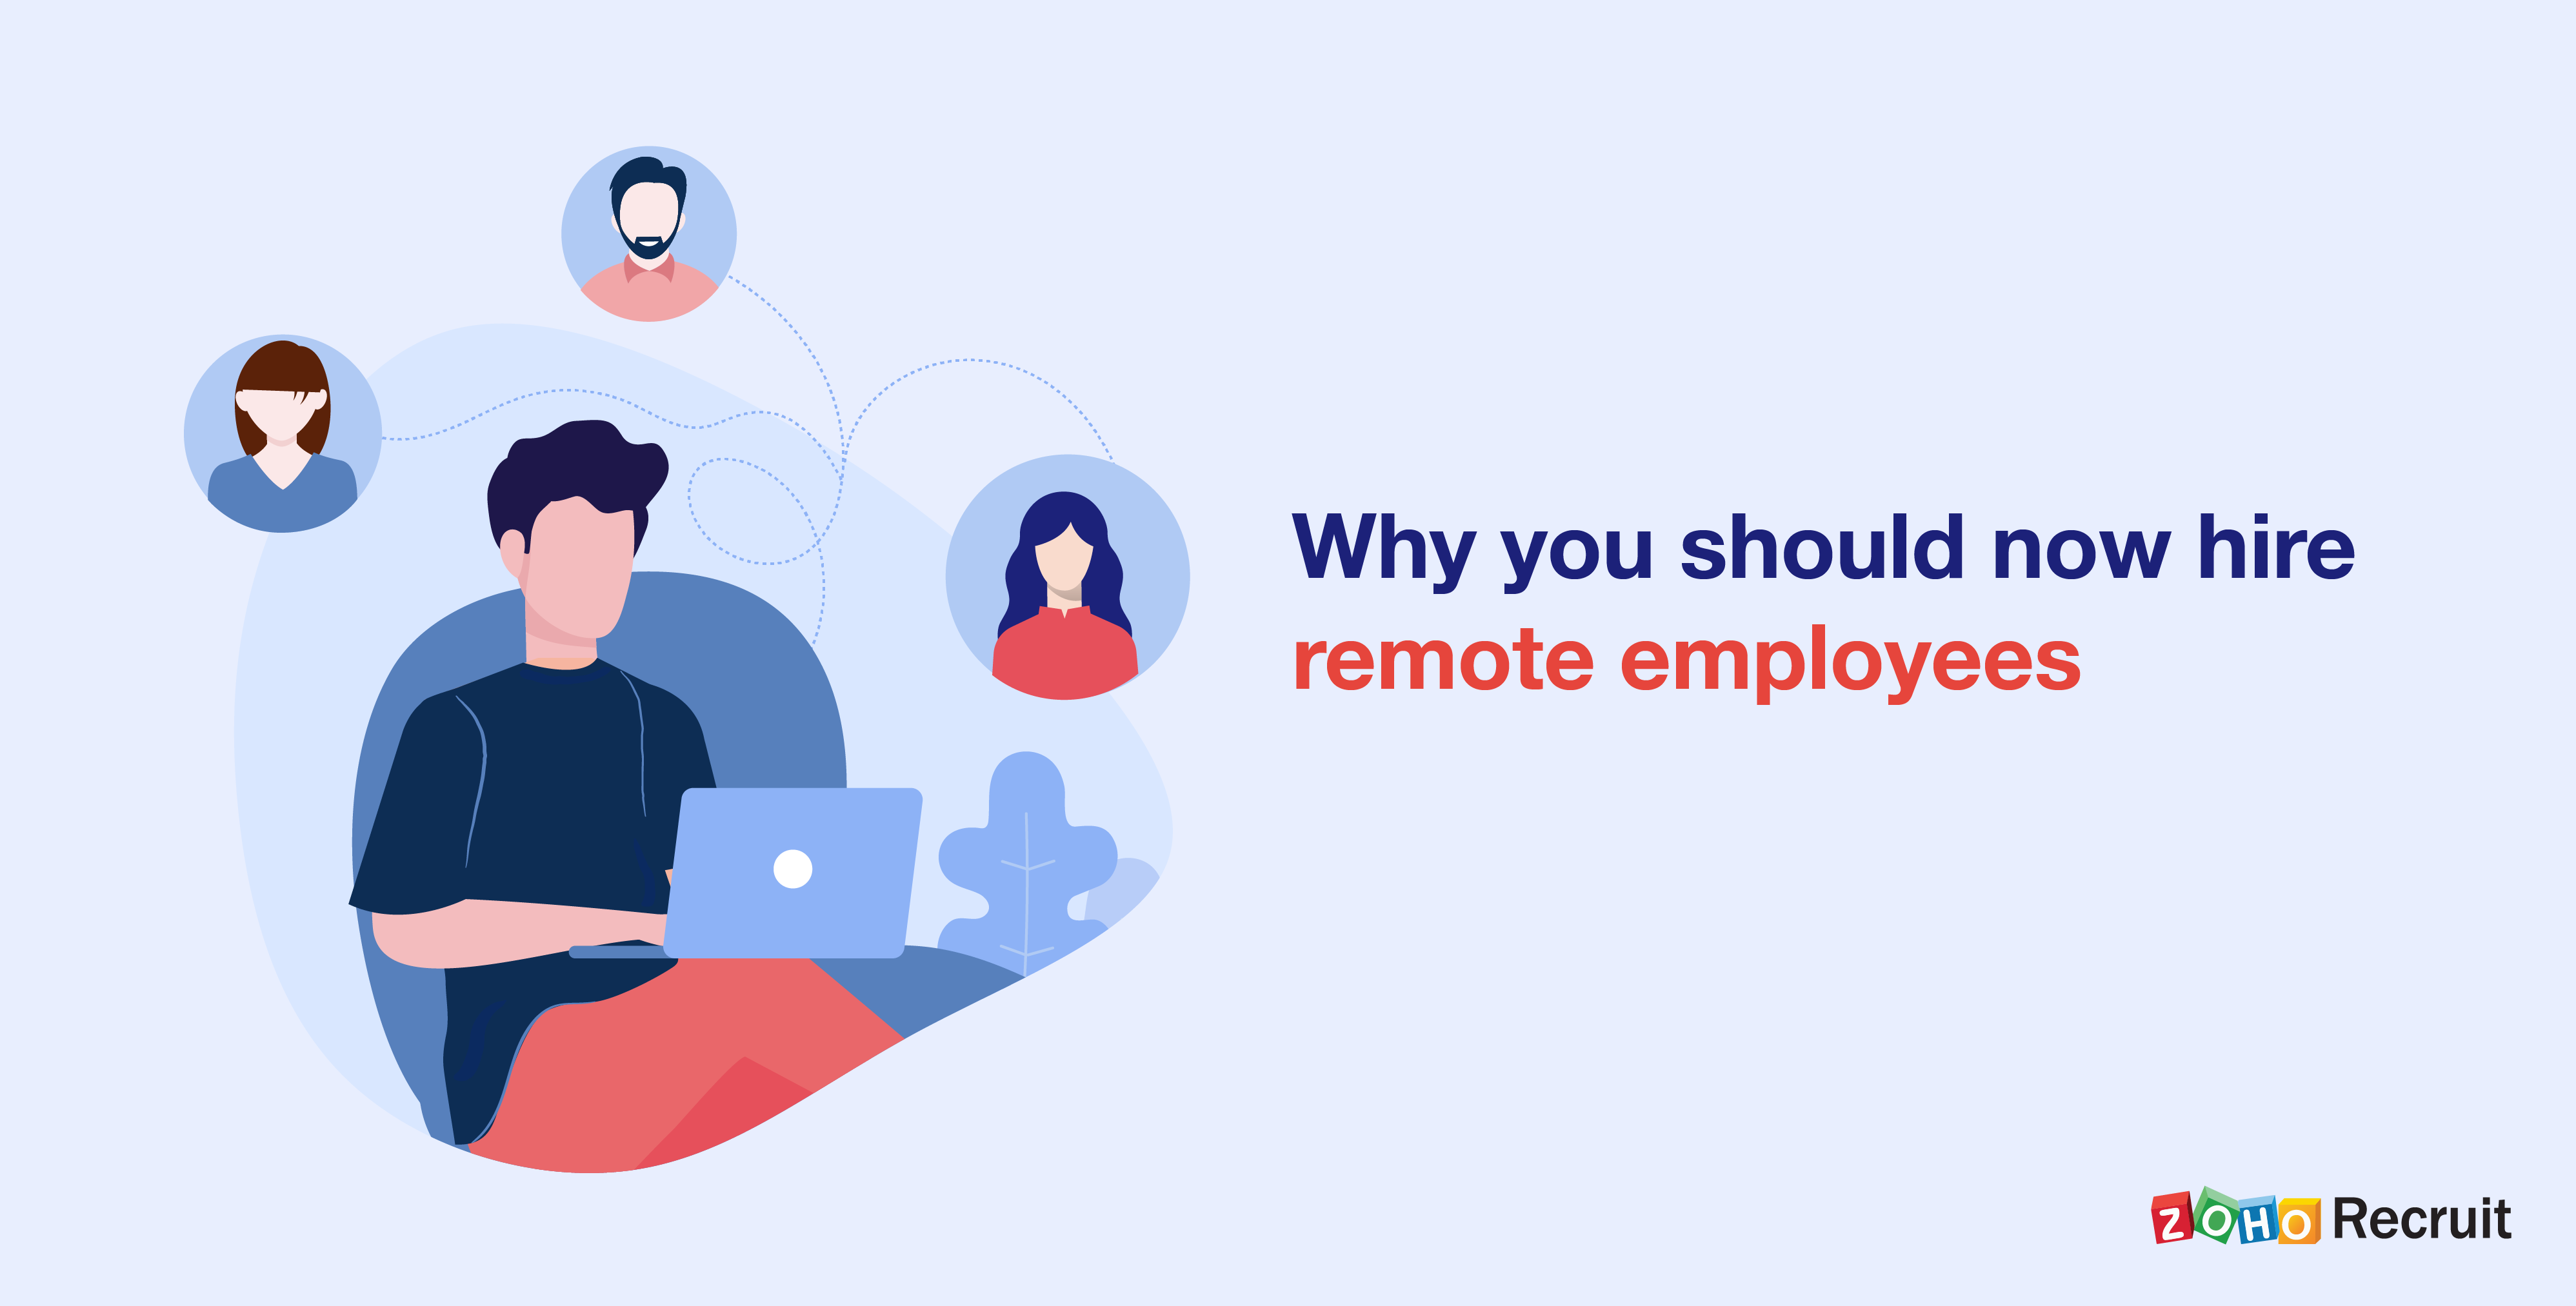 Remote hiring: Now and into the future